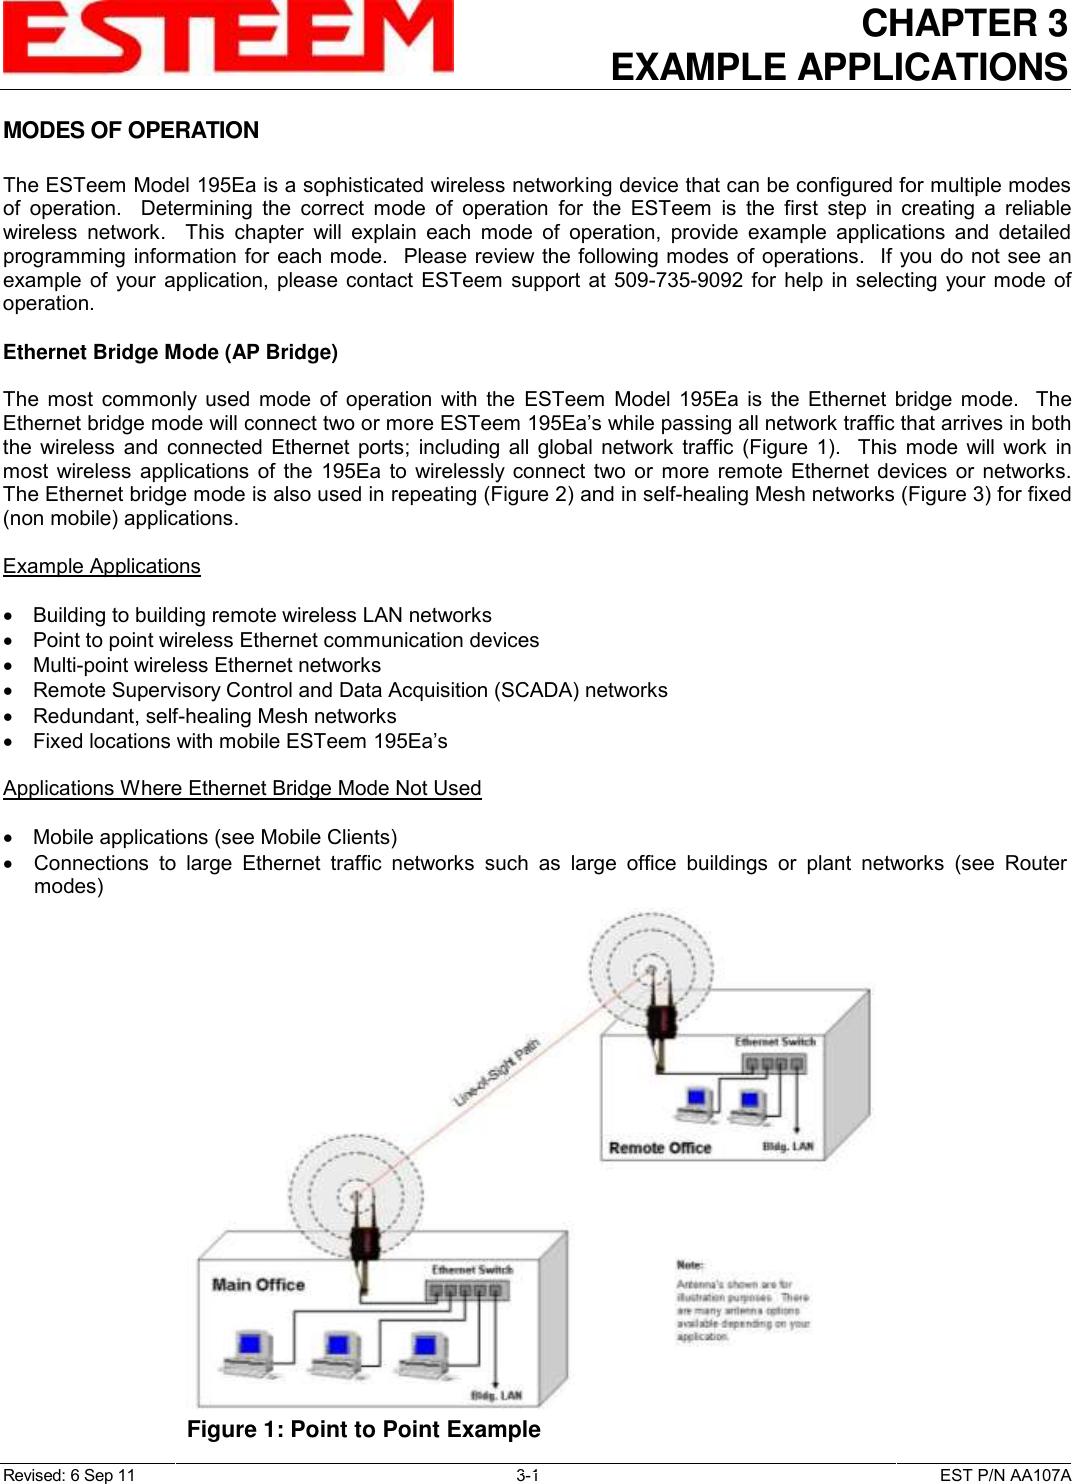 CHAPTER 3 EXAMPLE APPLICATIONS  Revised: 6 Sep 11  3-1  EST P/N AA107A MODES OF OPERATION  The ESTeem Model 195Ea is a sophisticated wireless networking device that can be configured for multiple modes of  operation.    Determining  the  correct  mode  of  operation  for  the  ESTeem  is  the  first  step  in  creating  a  reliable wireless  network.    This  chapter  will  explain  each  mode  of  operation,  provide  example  applications  and  detailed programming information for each mode.  Please review the following modes of operations.  If you do not see an example  of  your application, please contact  ESTeem  support  at 509-735-9092  for  help in selecting  your mode  of operation.  Ethernet Bridge Mode (AP Bridge)  The  most  commonly  used  mode  of  operation  with  the  ESTeem  Model  195Ea  is  the  Ethernet  bridge  mode.    The Ethernet bridge mode will connect two or more ESTeem 195Ea’s while passing all network traffic that arrives in both the  wireless  and  connected  Ethernet  ports;  including all  global  network  traffic  (Figure  1).    This  mode  will work  in most  wireless  applications of  the  195Ea  to  wirelessly  connect  two  or  more  remote  Ethernet devices or  networks.  The Ethernet bridge mode is also used in repeating (Figure 2) and in self-healing Mesh networks (Figure 3) for fixed (non mobile) applications.  Example Applications    Building to building remote wireless LAN networks   Point to point wireless Ethernet communication devices   Multi-point wireless Ethernet networks   Remote Supervisory Control and Data Acquisition (SCADA) networks   Redundant, self-healing Mesh networks   Fixed locations with mobile ESTeem 195Ea’s  Applications Where Ethernet Bridge Mode Not Used    Mobile applications (see Mobile Clients)   Connections  to  large  Ethernet  traffic  networks  such  as  large  office  buildings  or  plant  networks  (see  Router modes)   Figure 1: Point to Point Example  